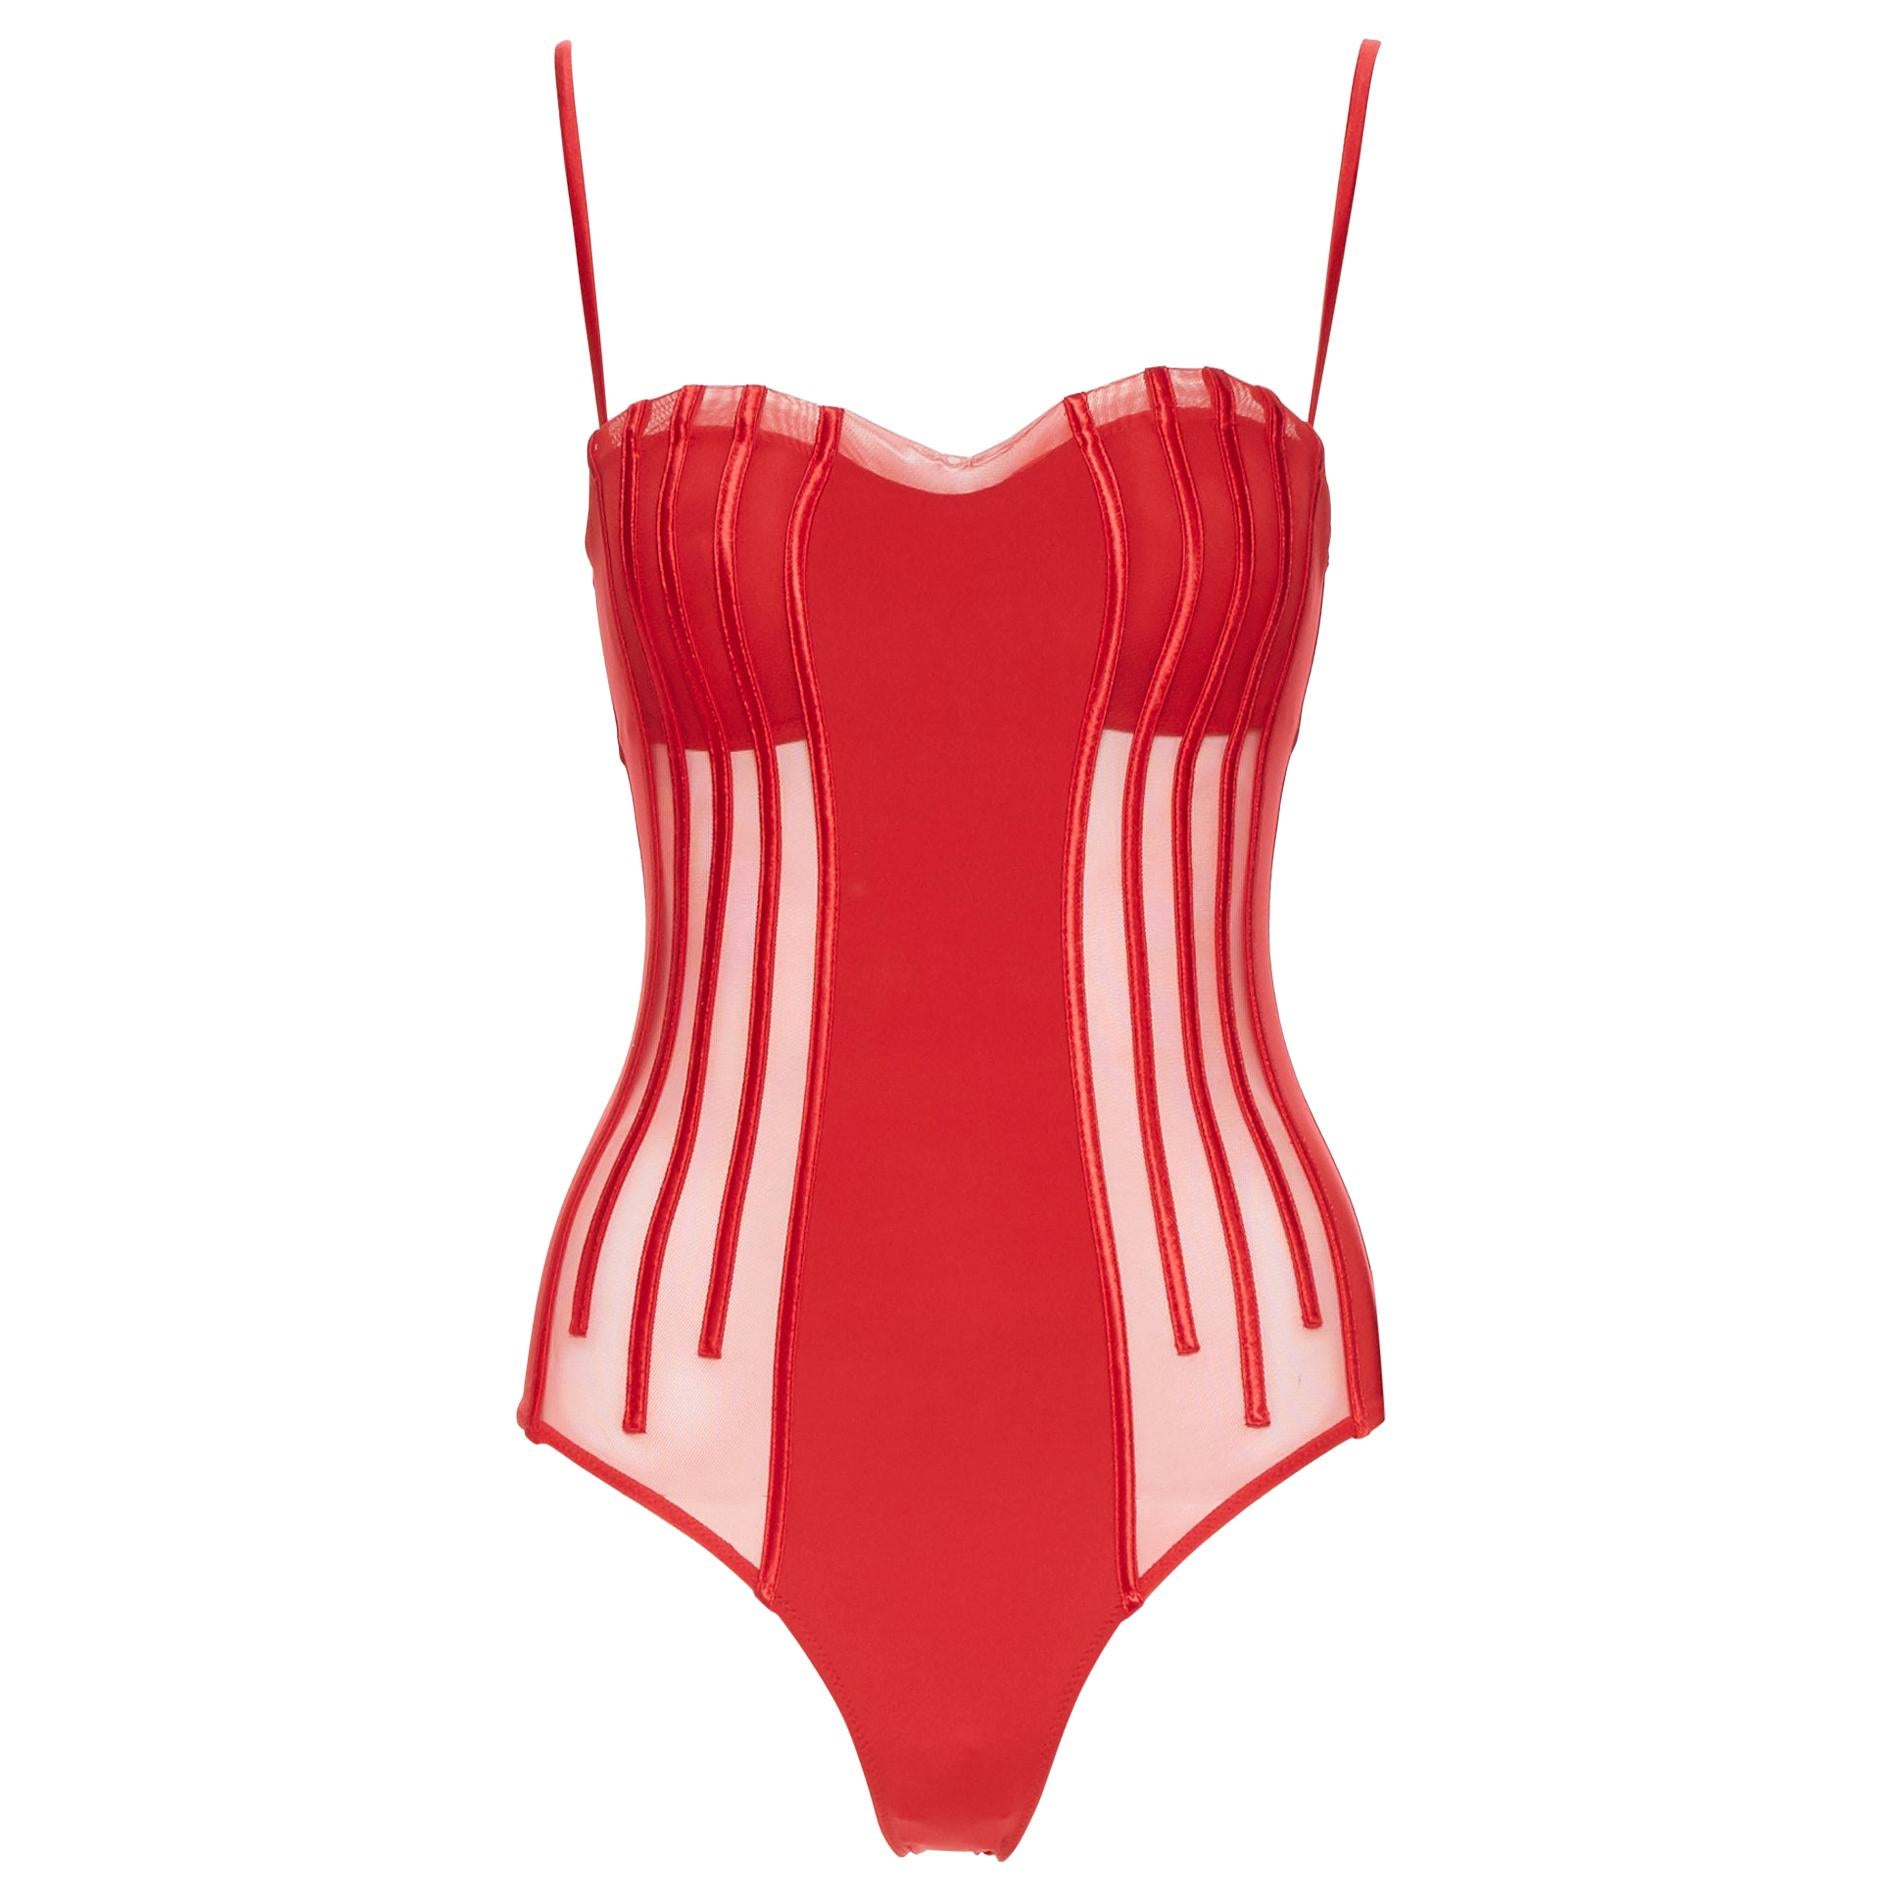 new LA PERLA Graphique Couture red boned sheer body monokini swimsuit IT44B  M at 1stDibs